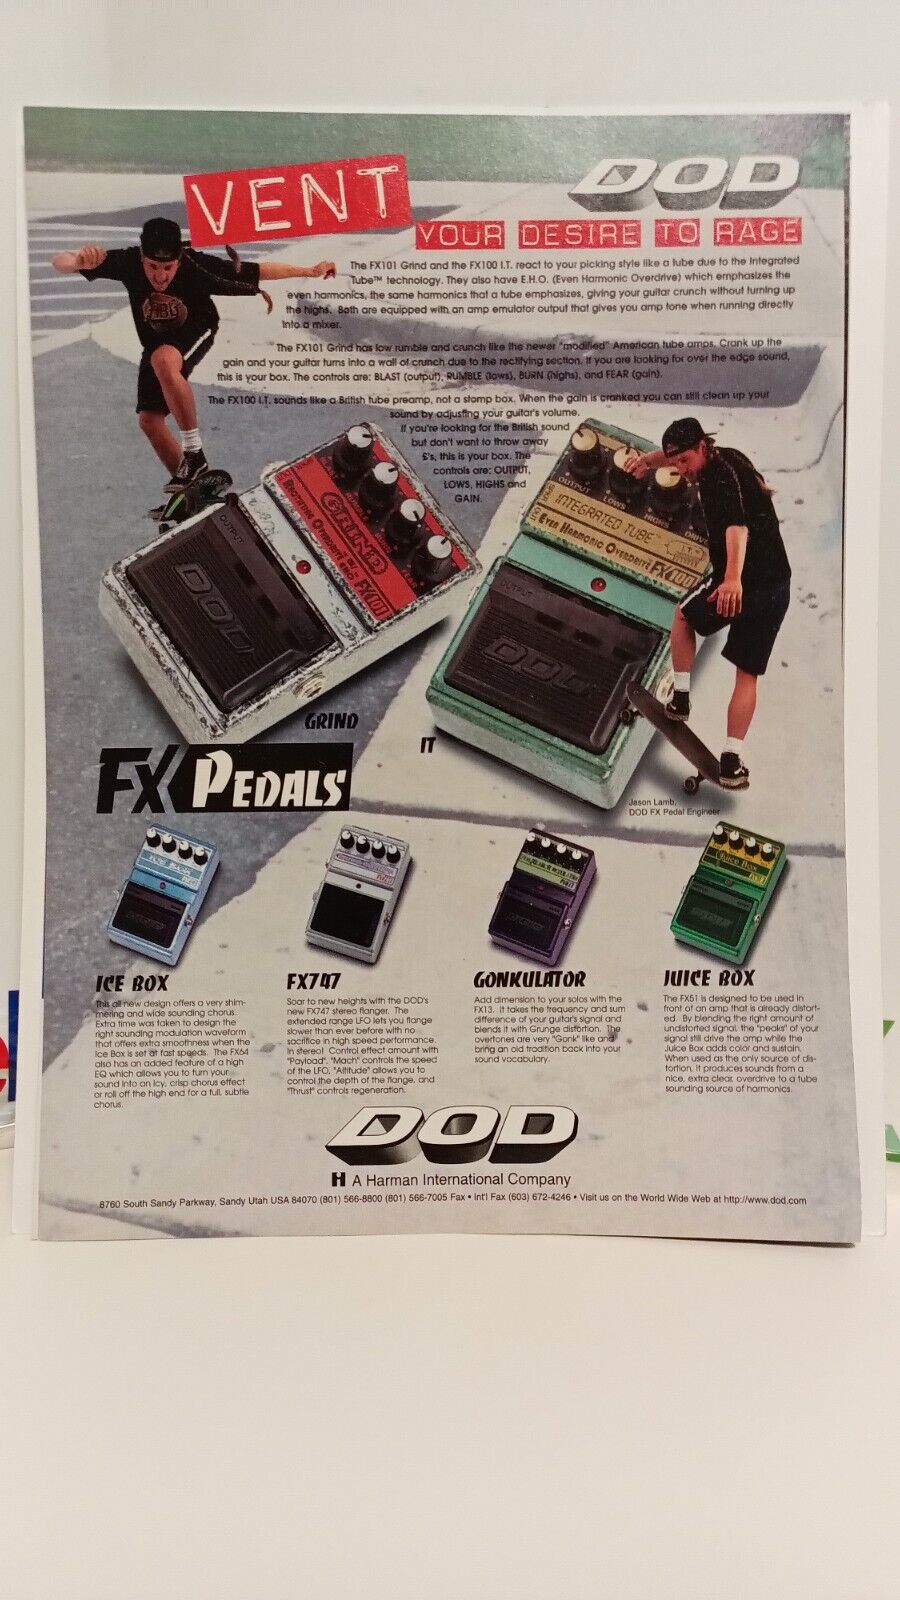 DOD GUITAR EFFECTS FX PEDALS  - 11X8.5 - PRINT AD.  9